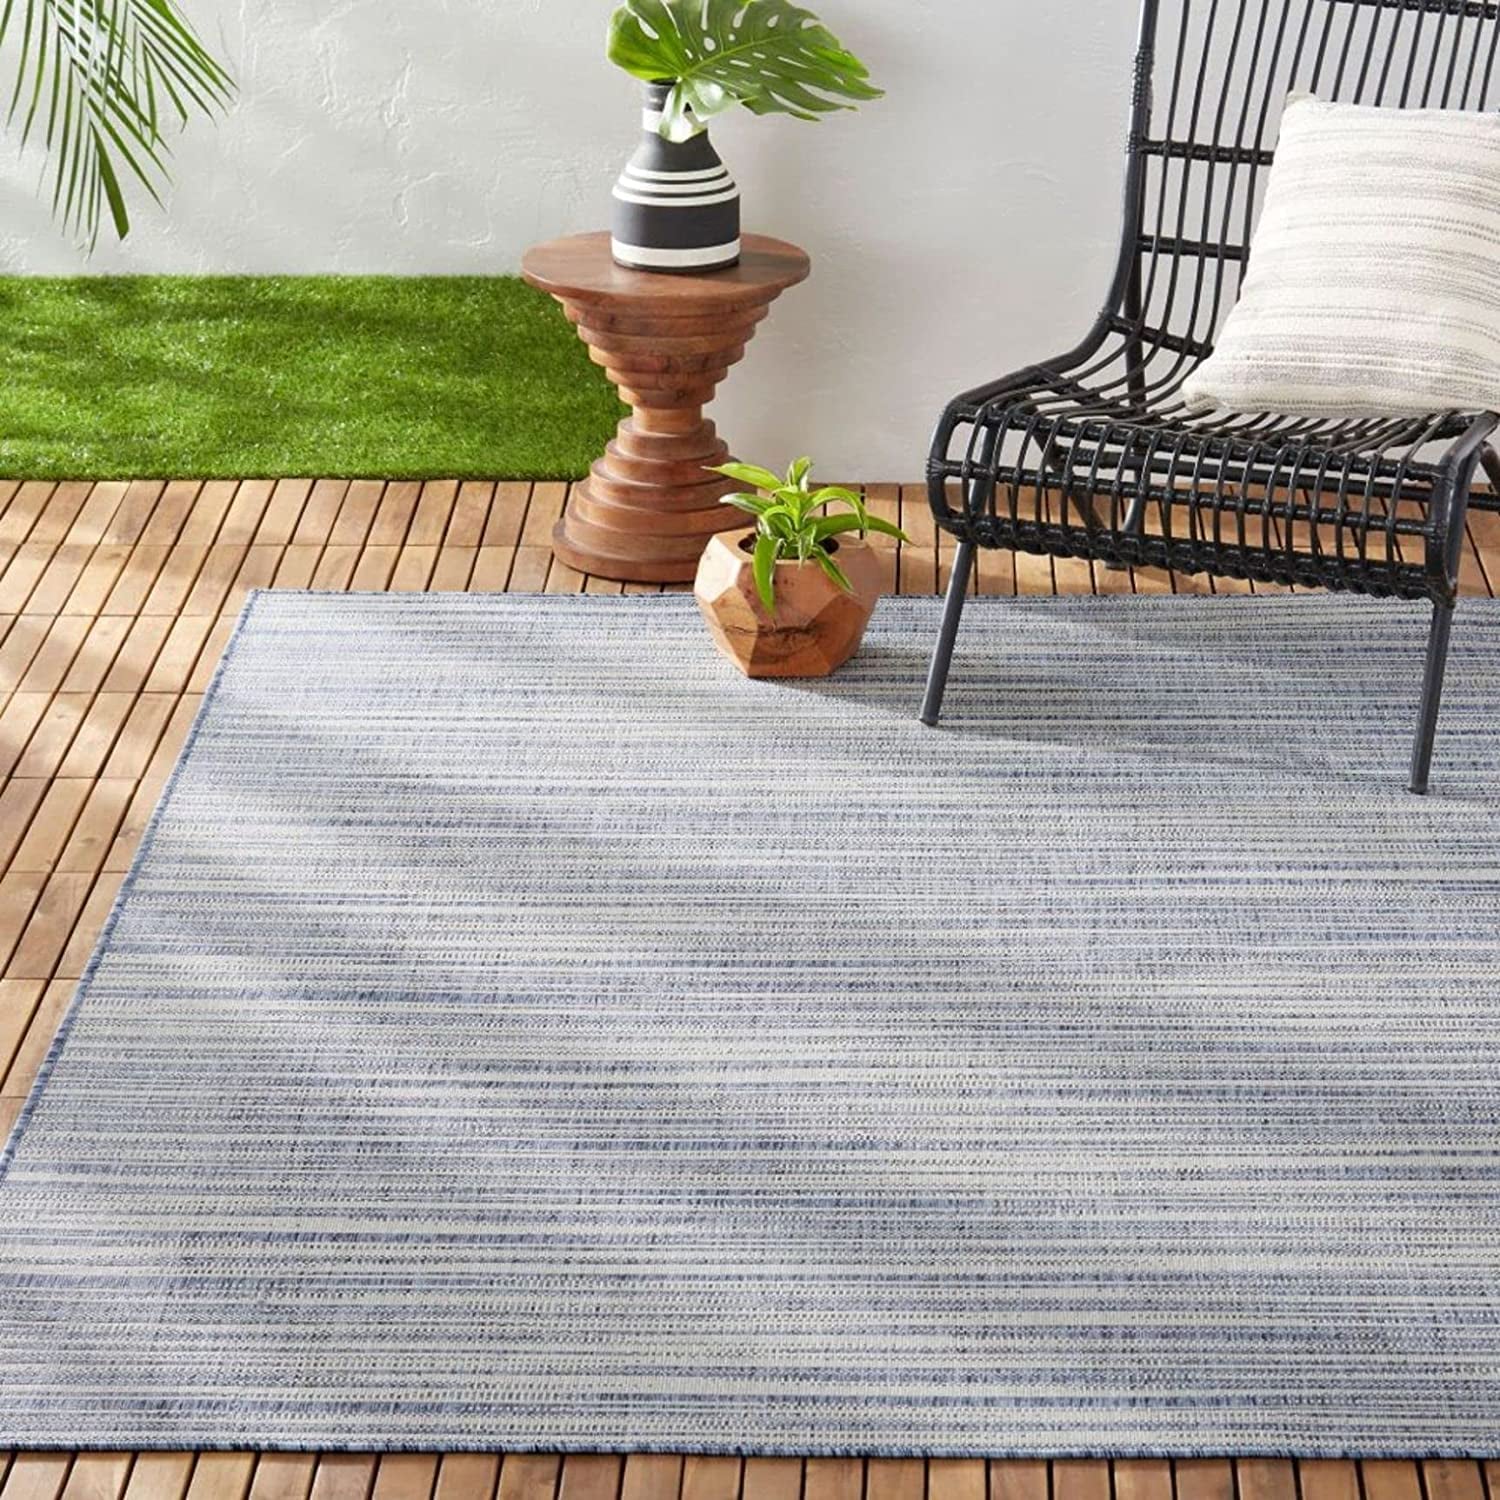 13 Best Outdoor Rugs You Can Buy on  in 2021